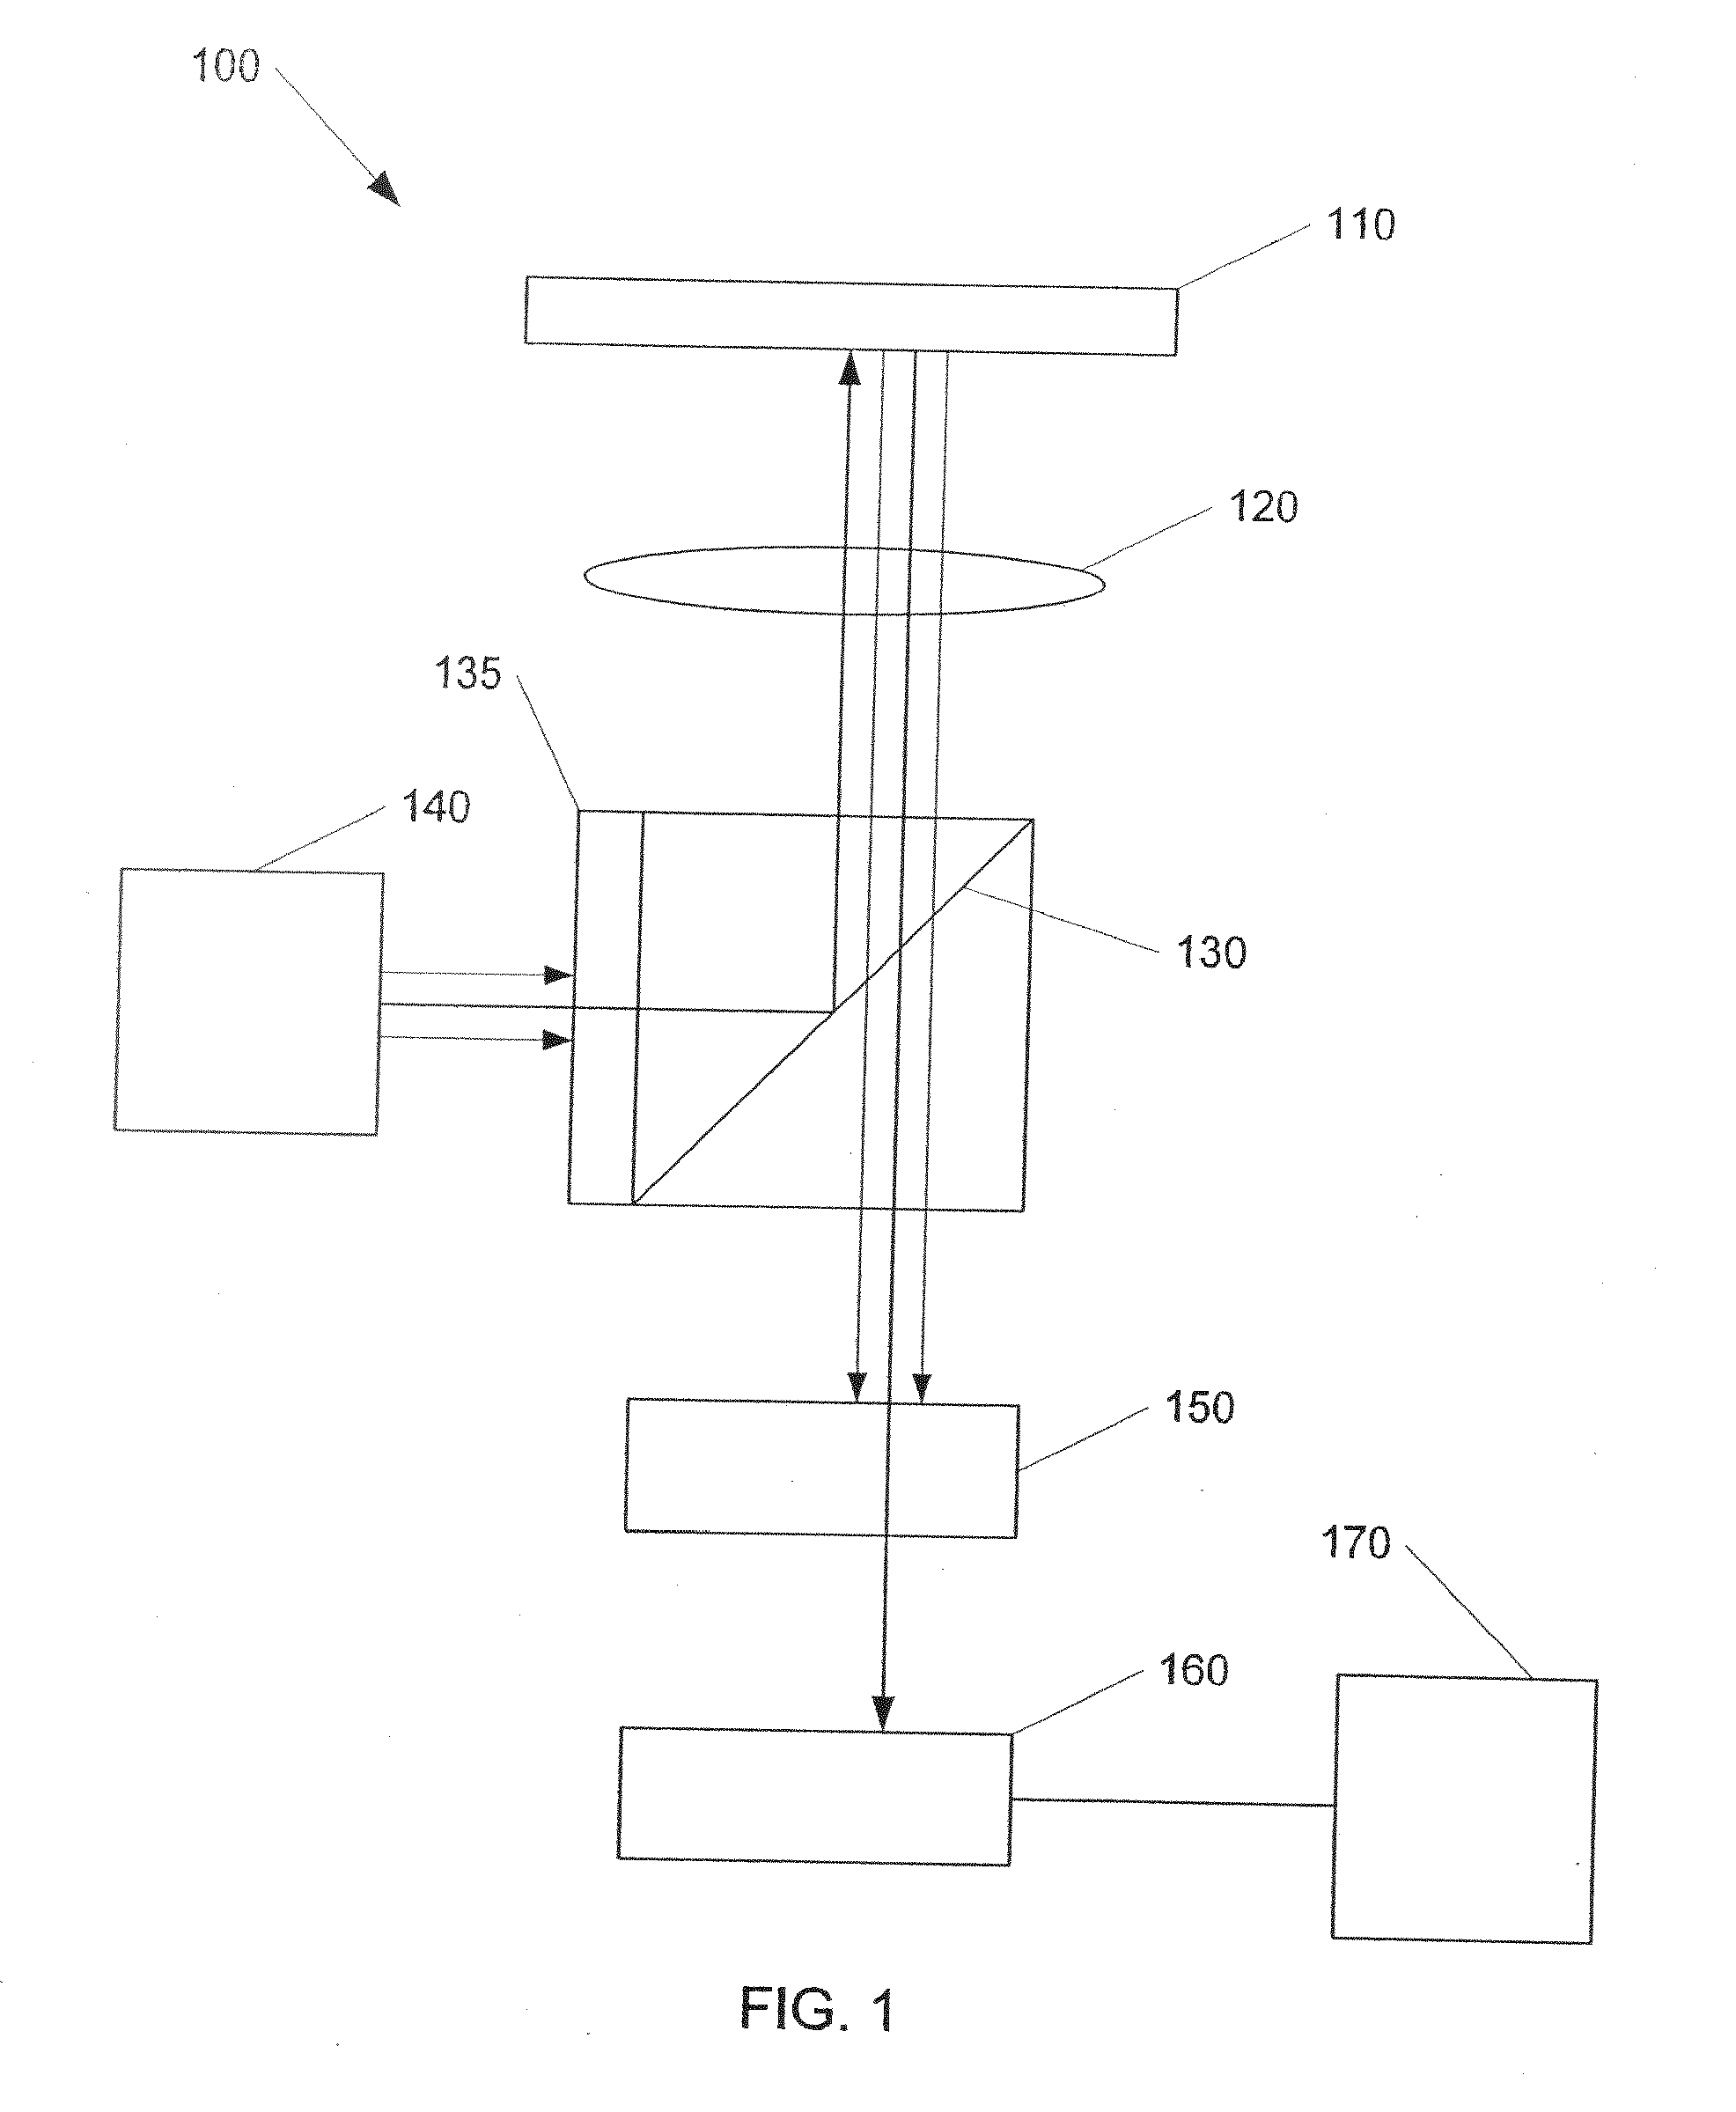 Systems and methods to analyze multiplexed bead-based assays using backscattered light